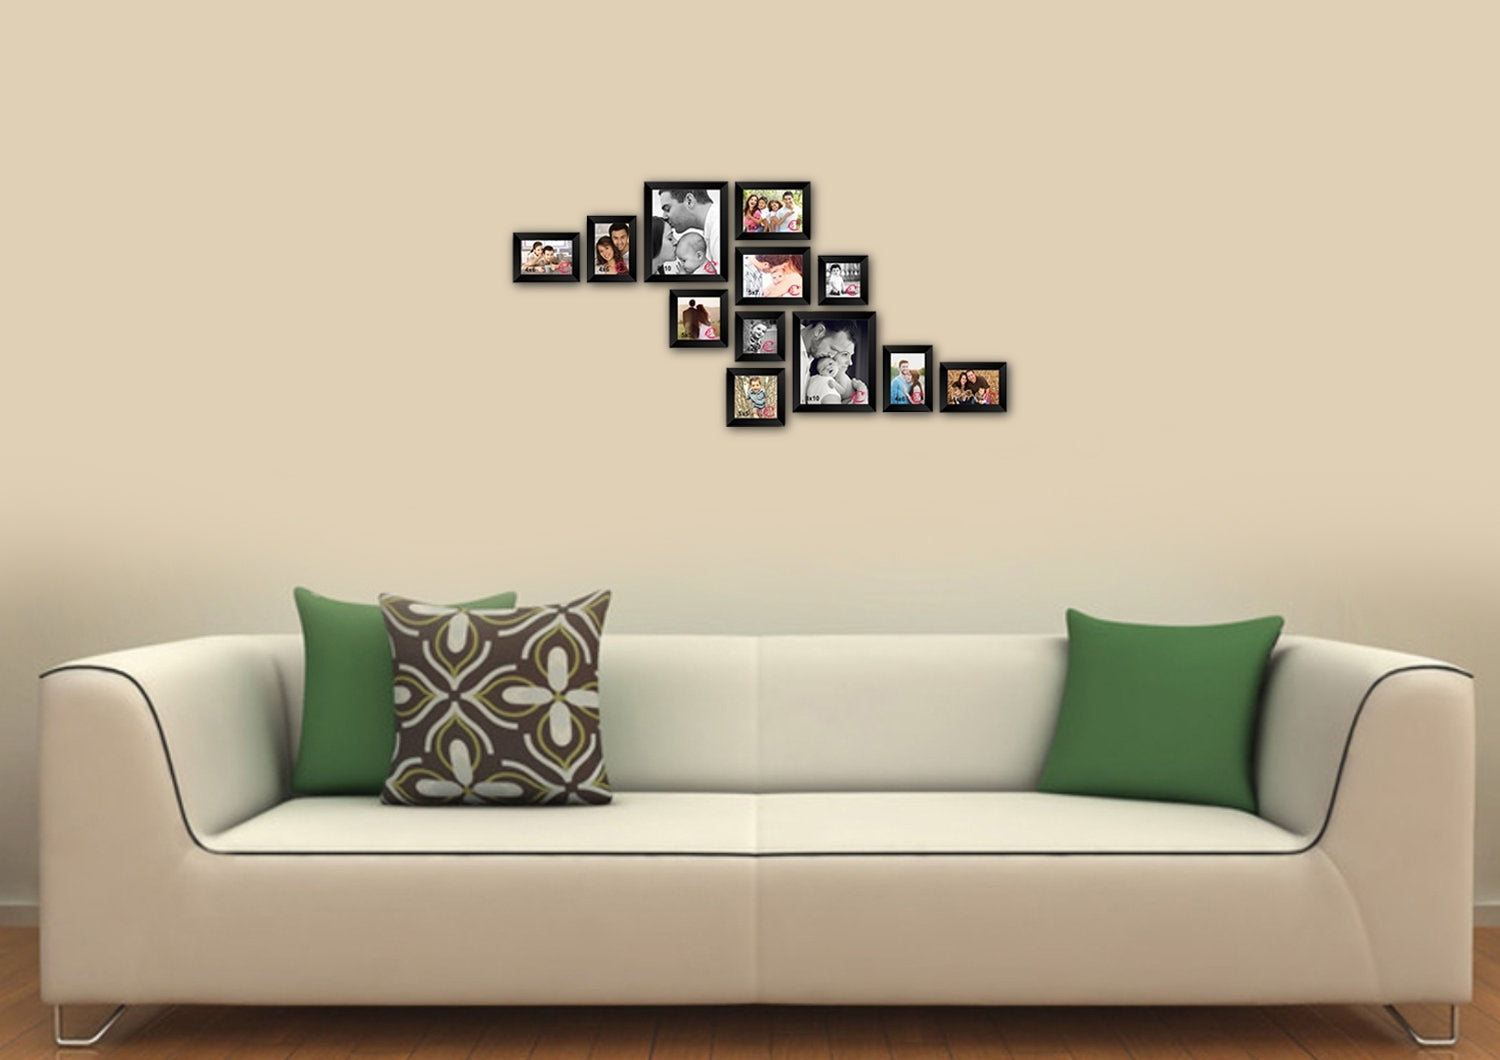 Memory Wall Collage Photo Frame Set of 12 individual photo frames 1